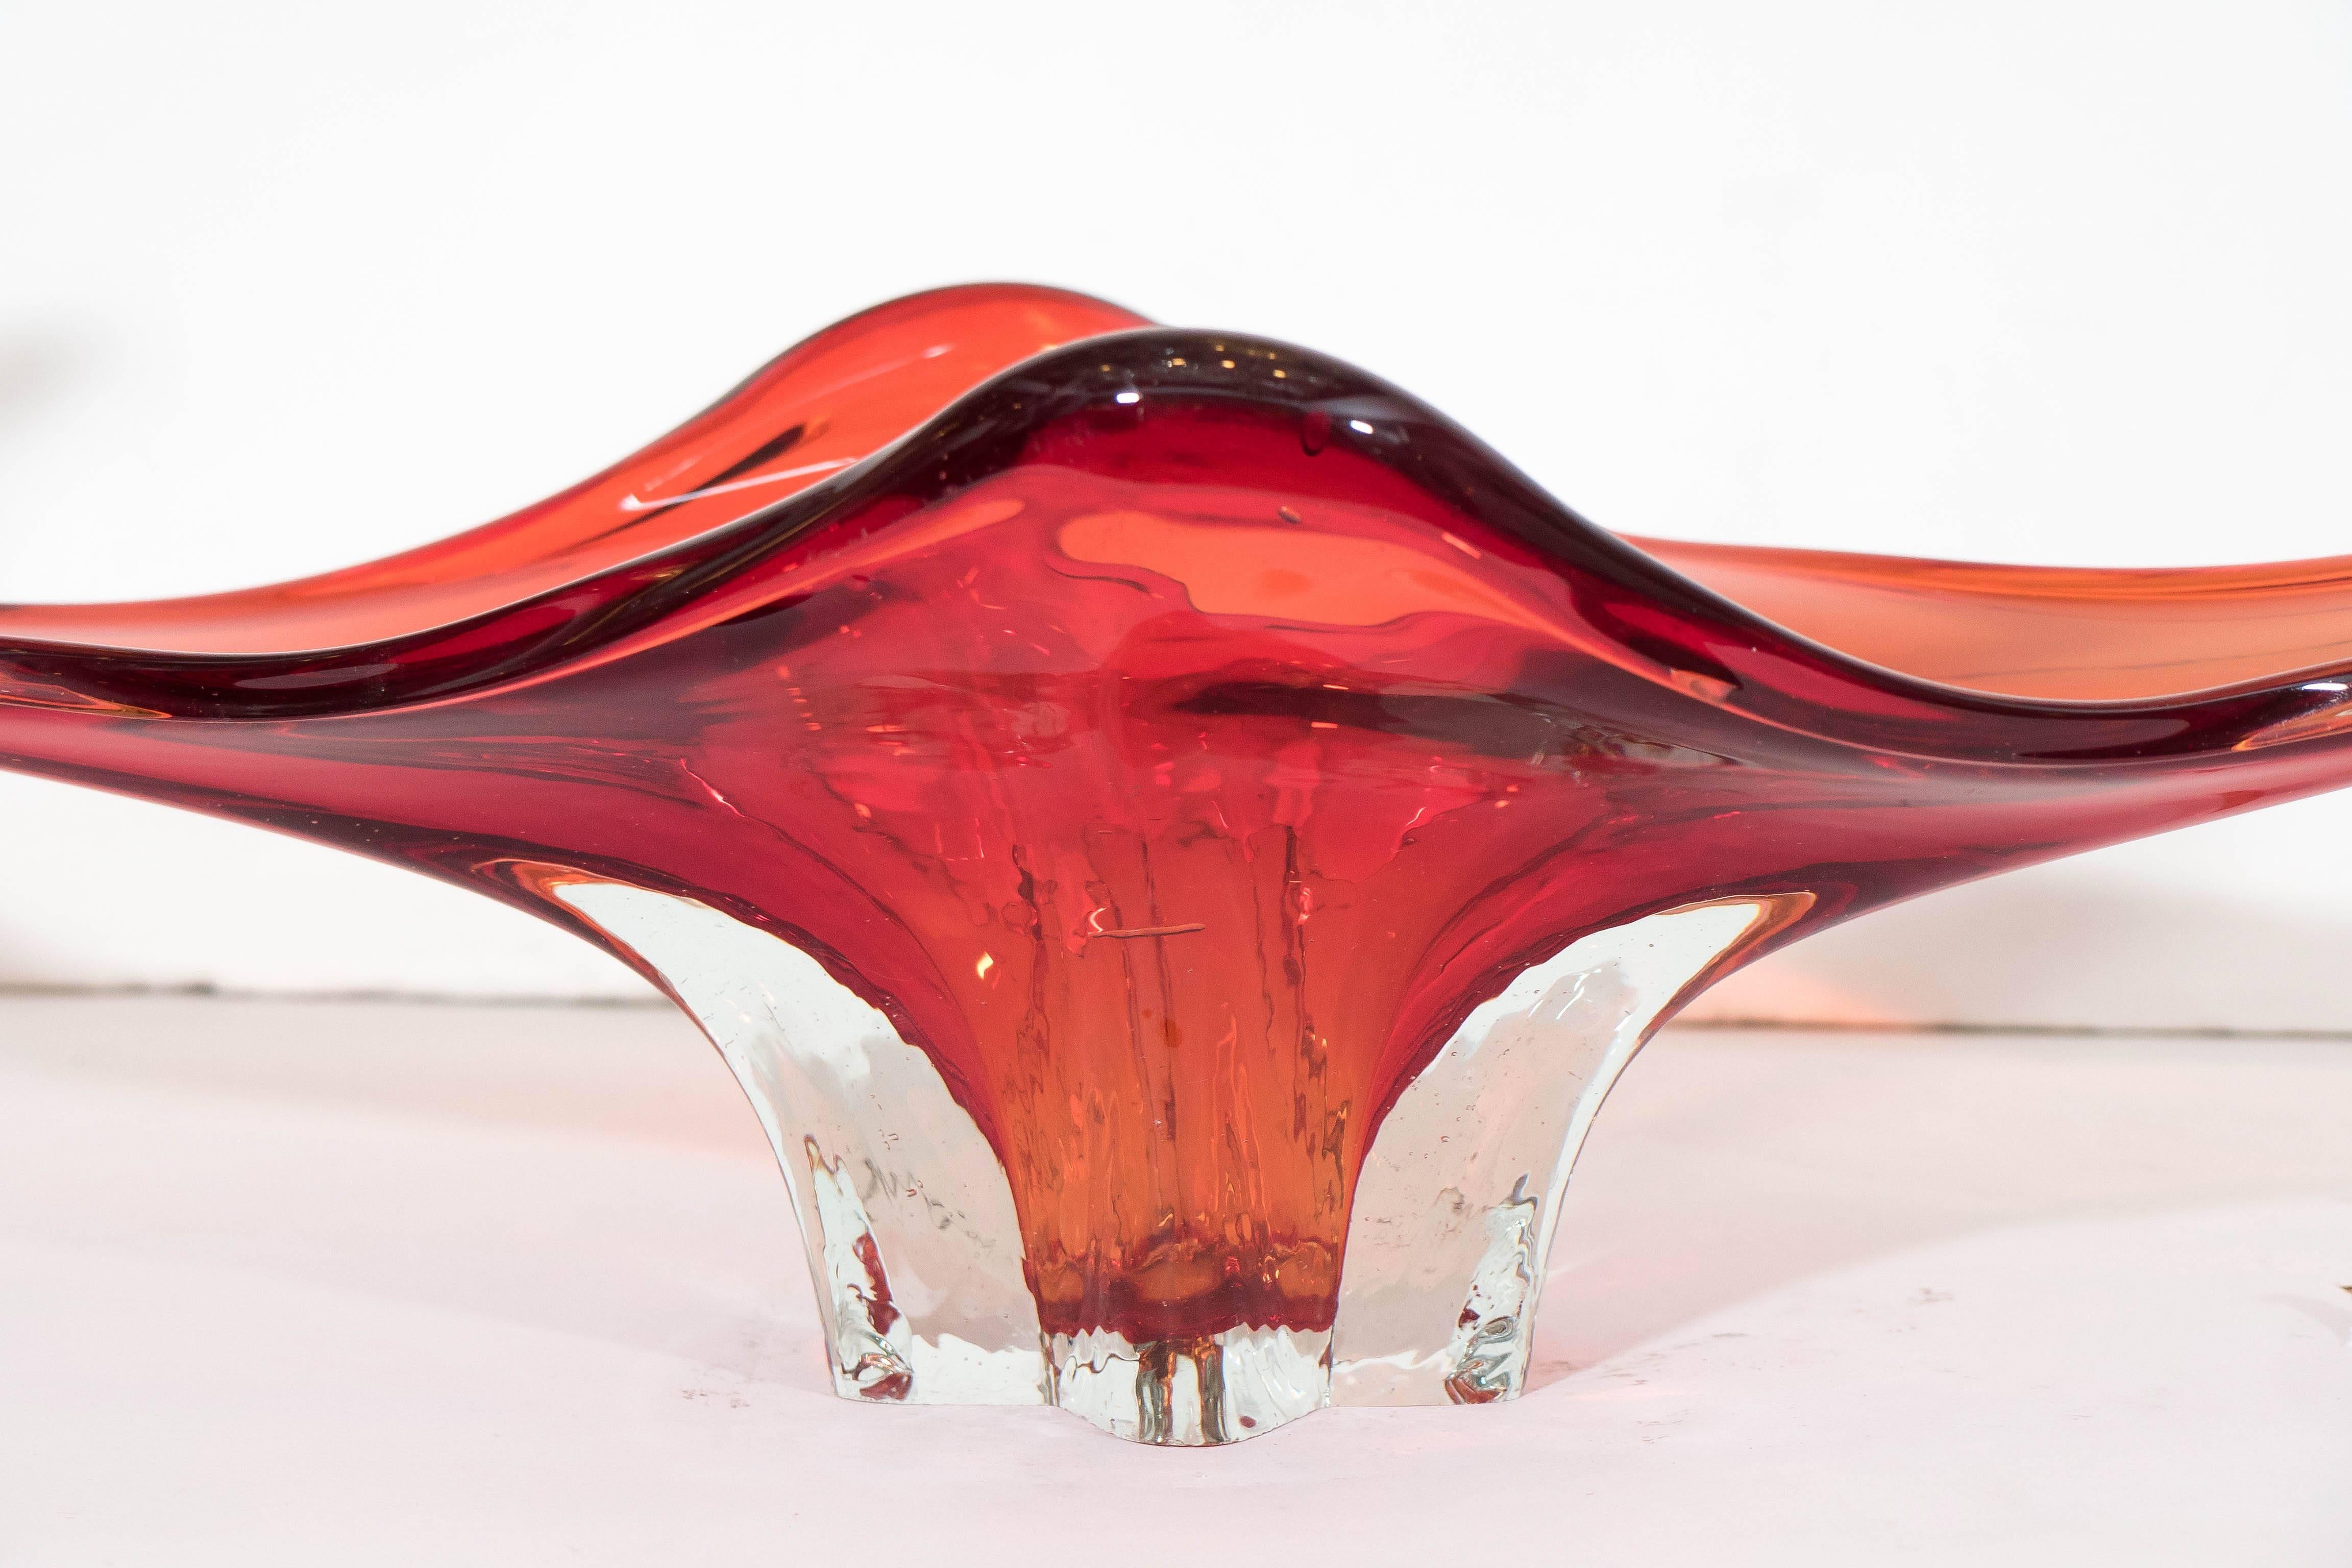 This decorative bowl and centerpiece, produced circa 1960s, comes in orange Sommerso Murano glass, rendered into a highly abstract, organic shape. Very good vintage condition, consistent with age and use.